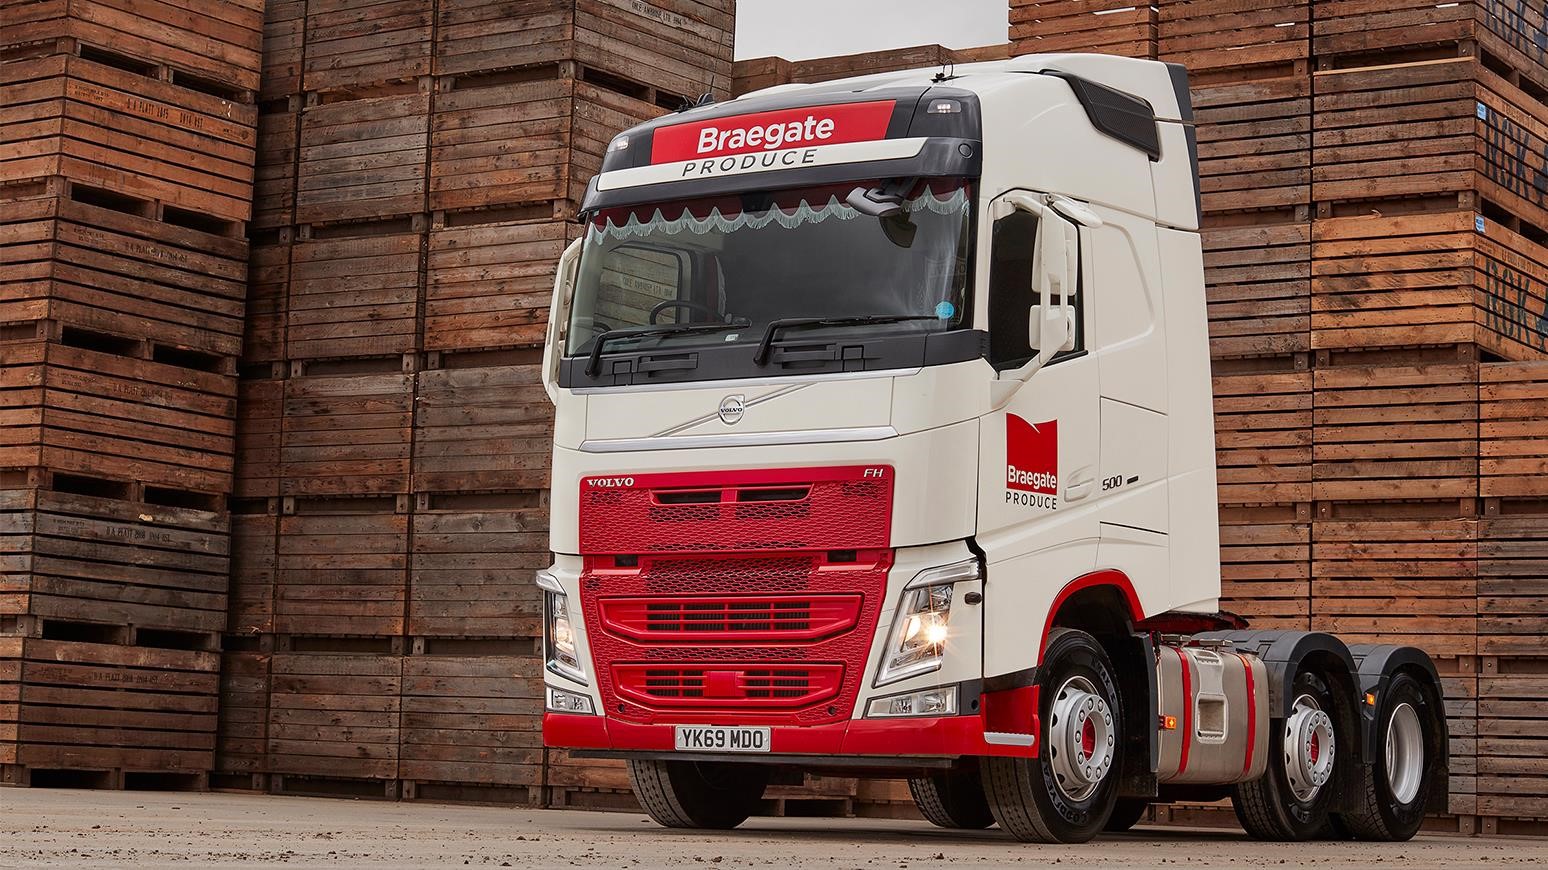 North Yorkshire-Based Braegate Produce Adds First Volvo Truck To Their Fleet